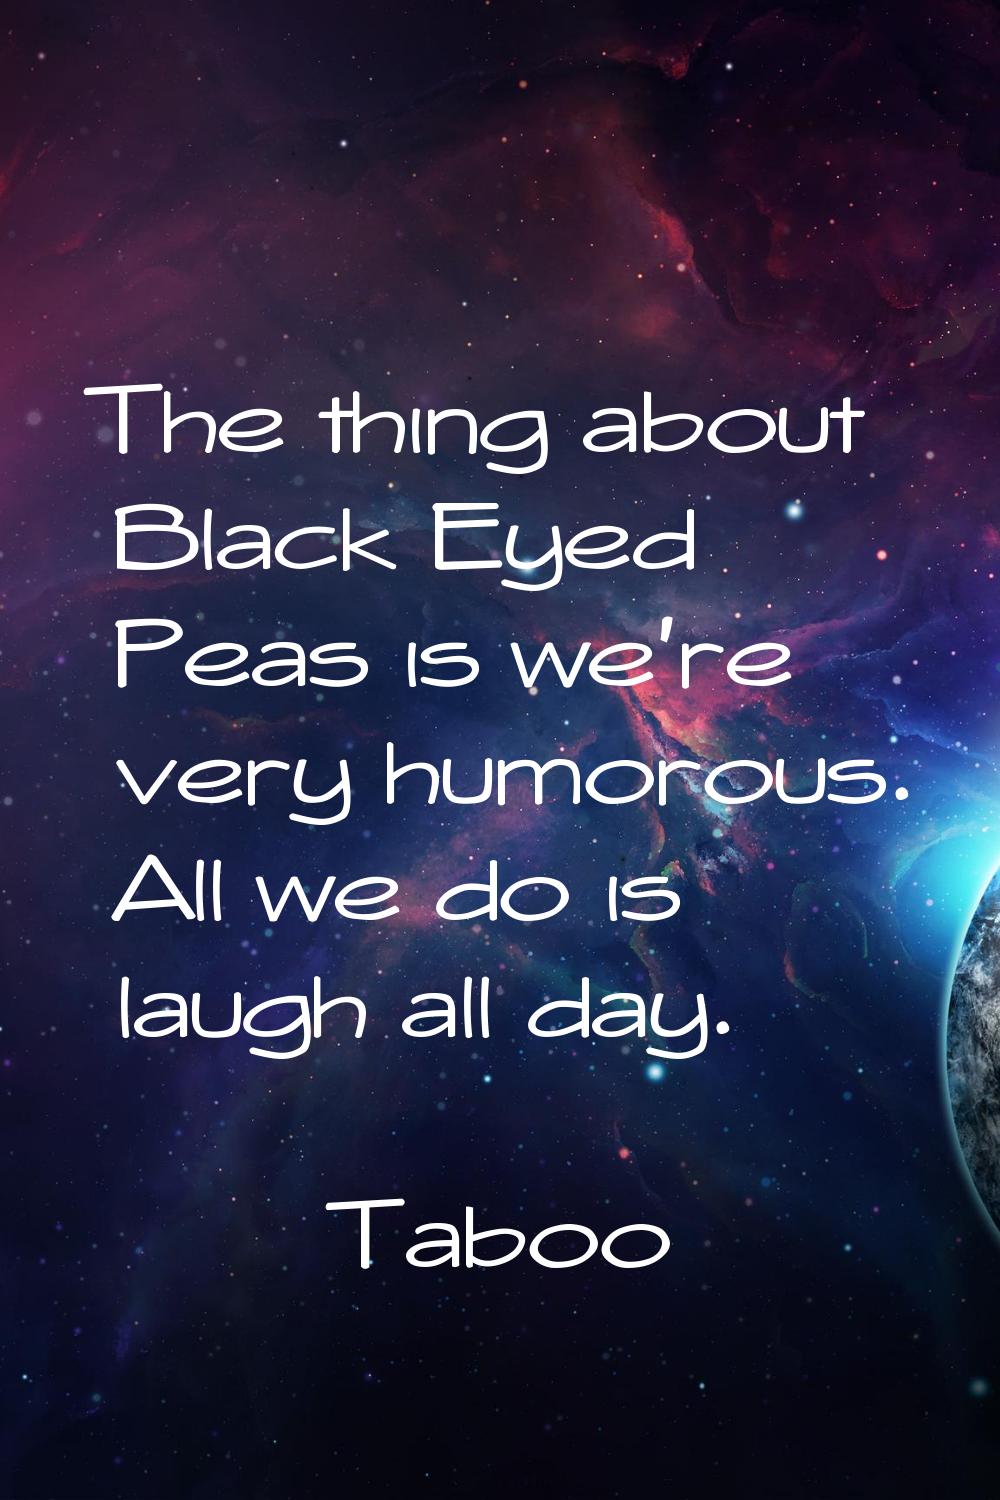 The thing about Black Eyed Peas is we're very humorous. All we do is laugh all day.